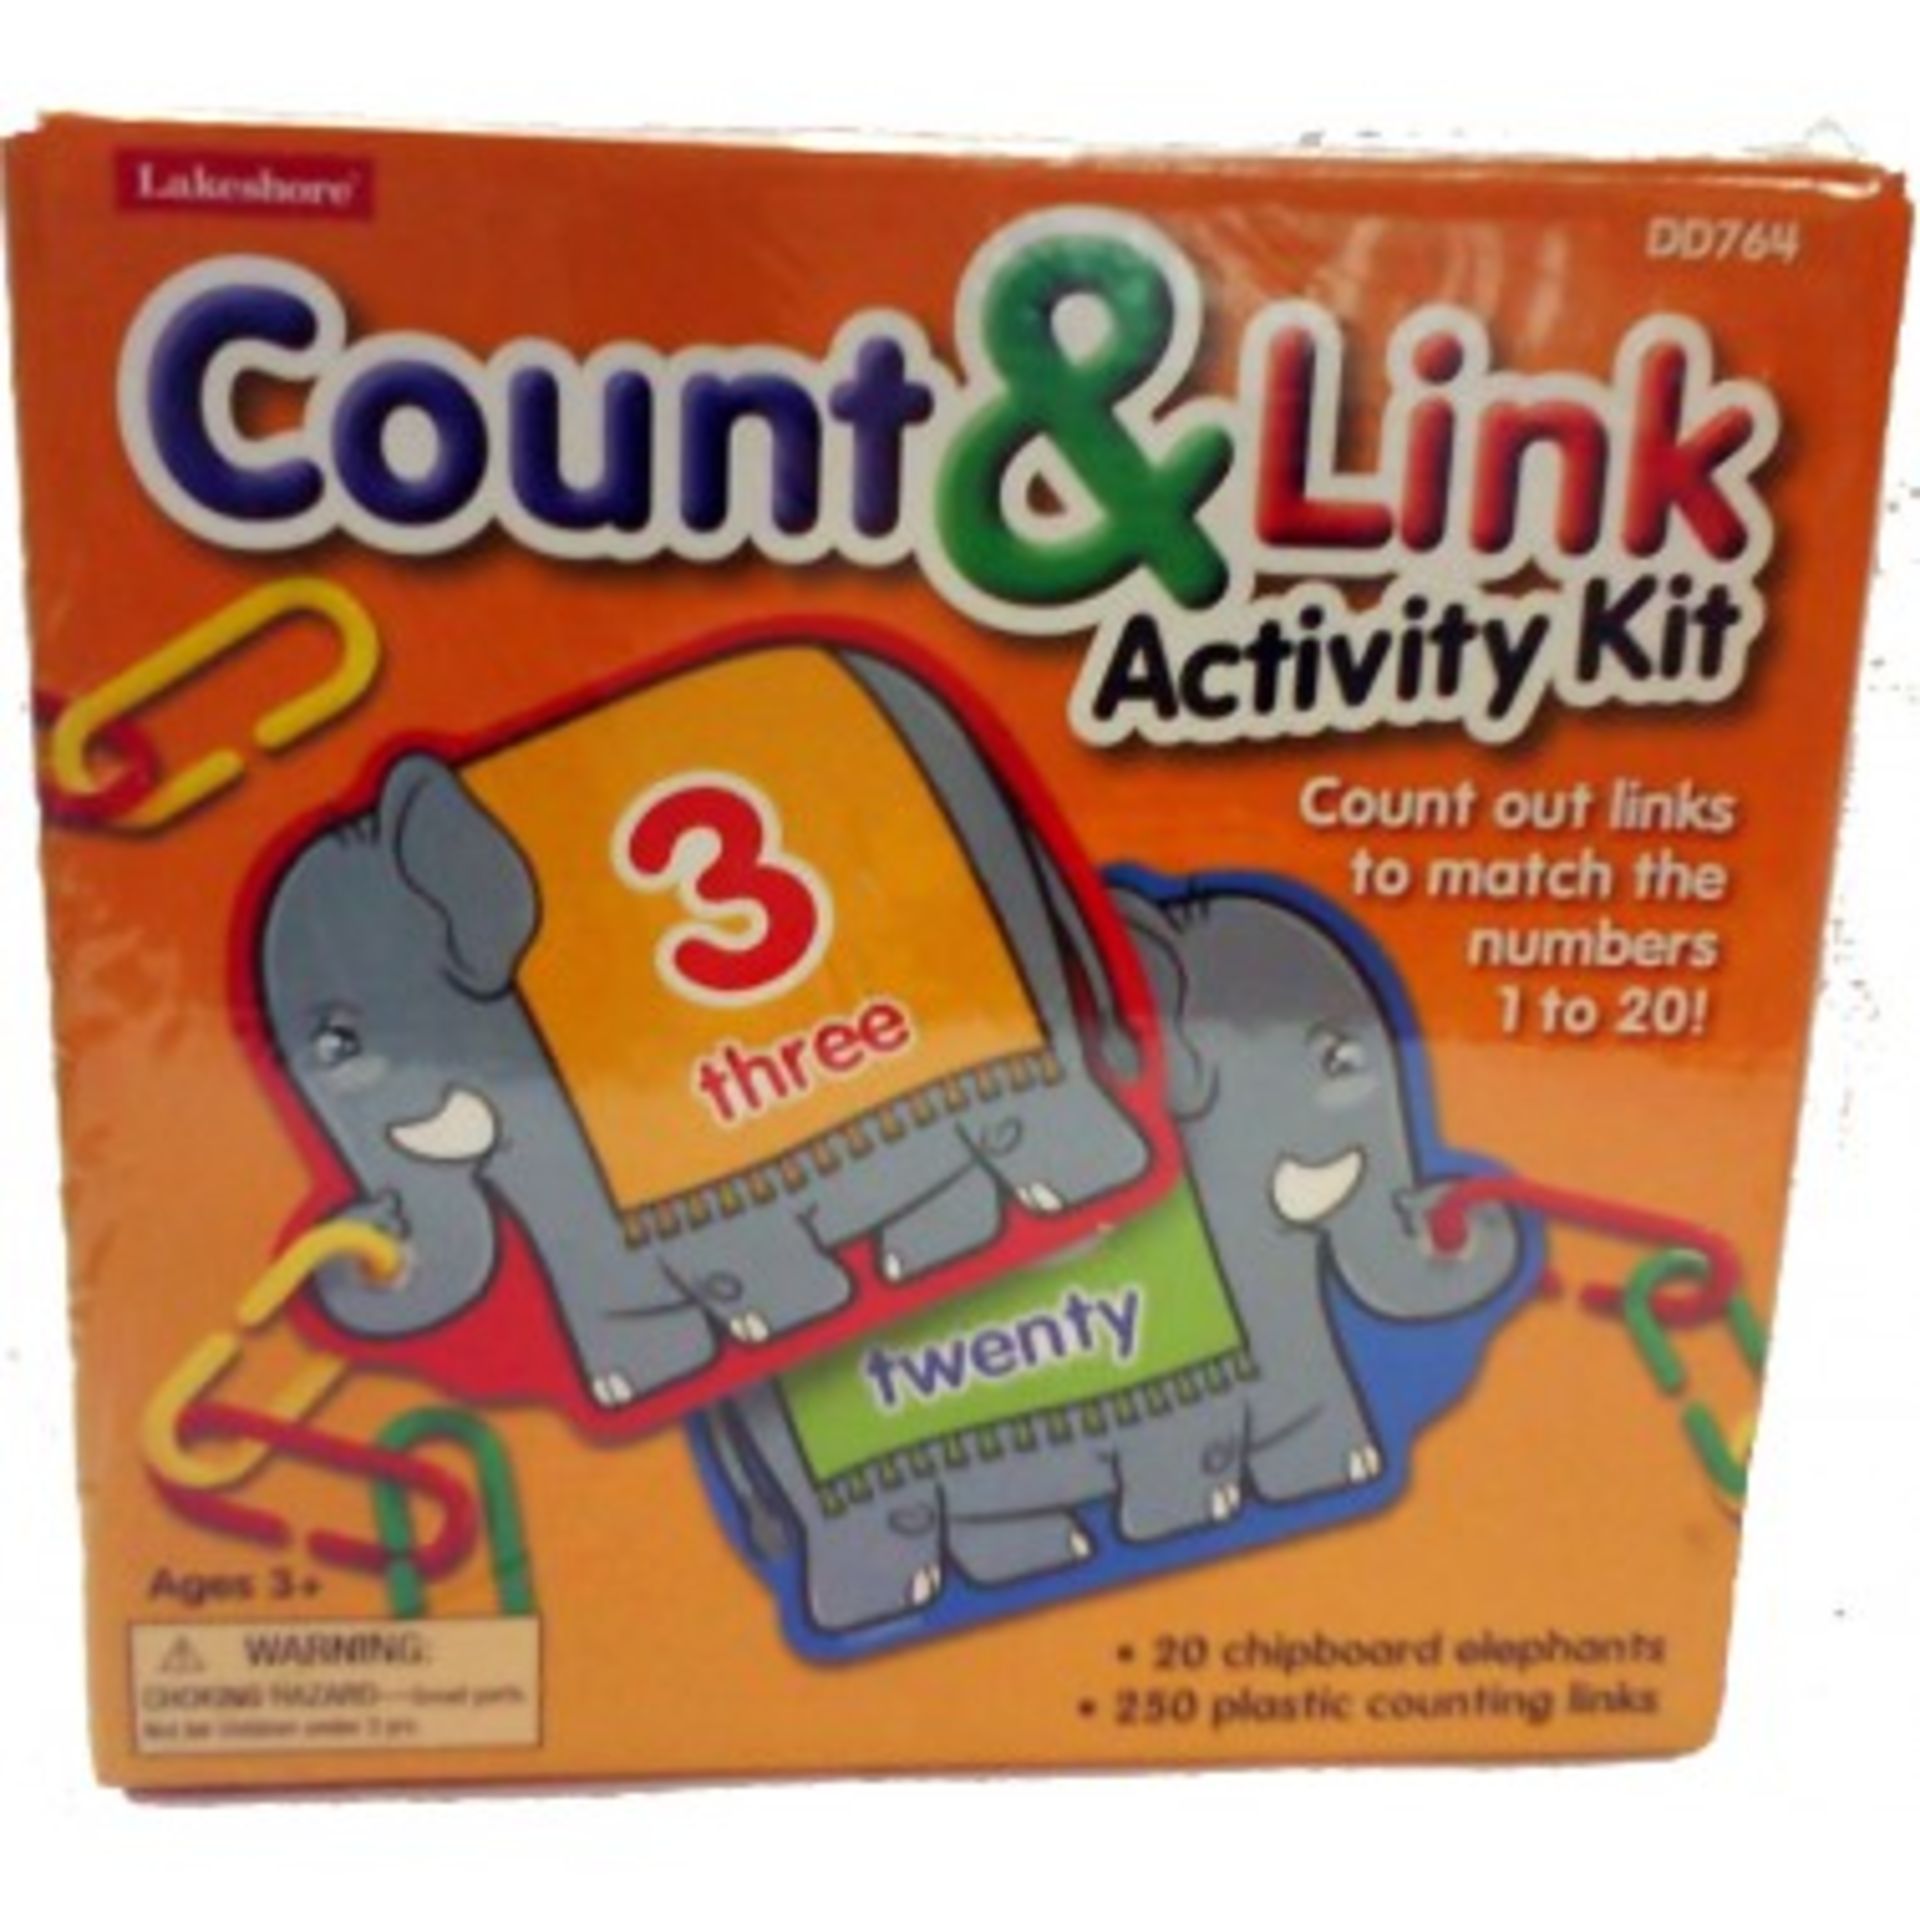 V Brand New Two Lakeshore Count & Link Activity Kits